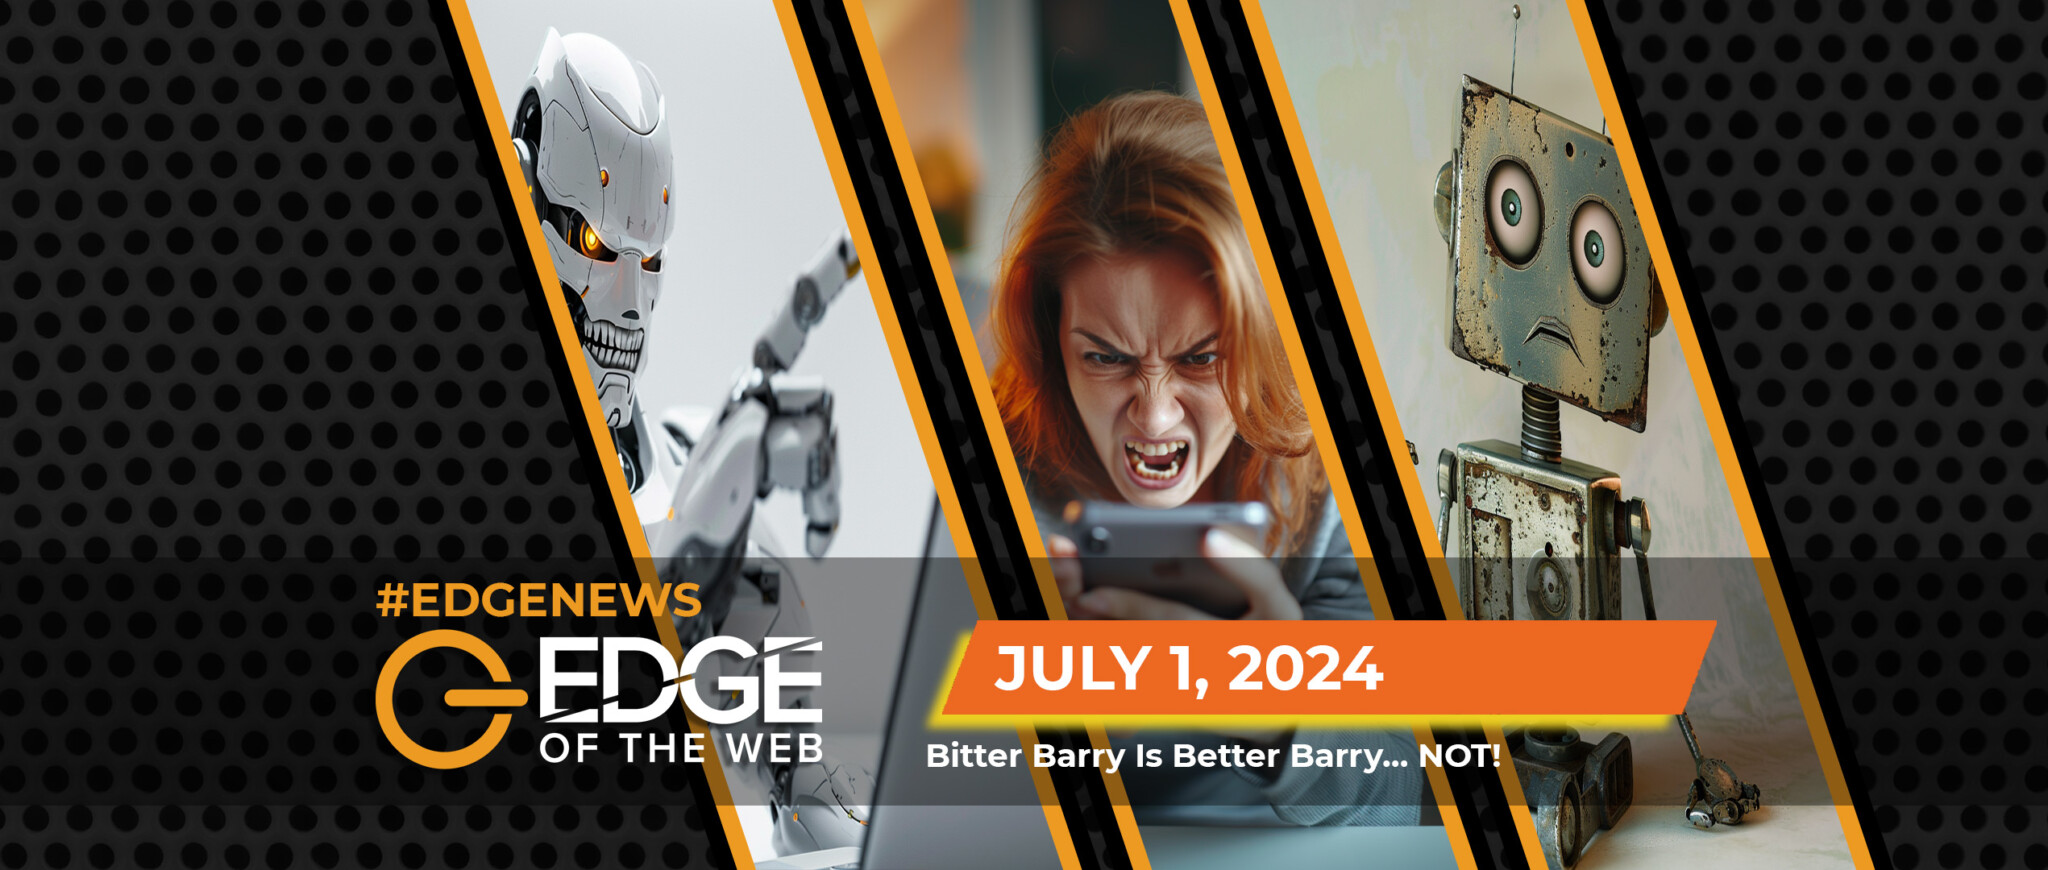 696 | News from the EDGE | Week of 7.1.2024